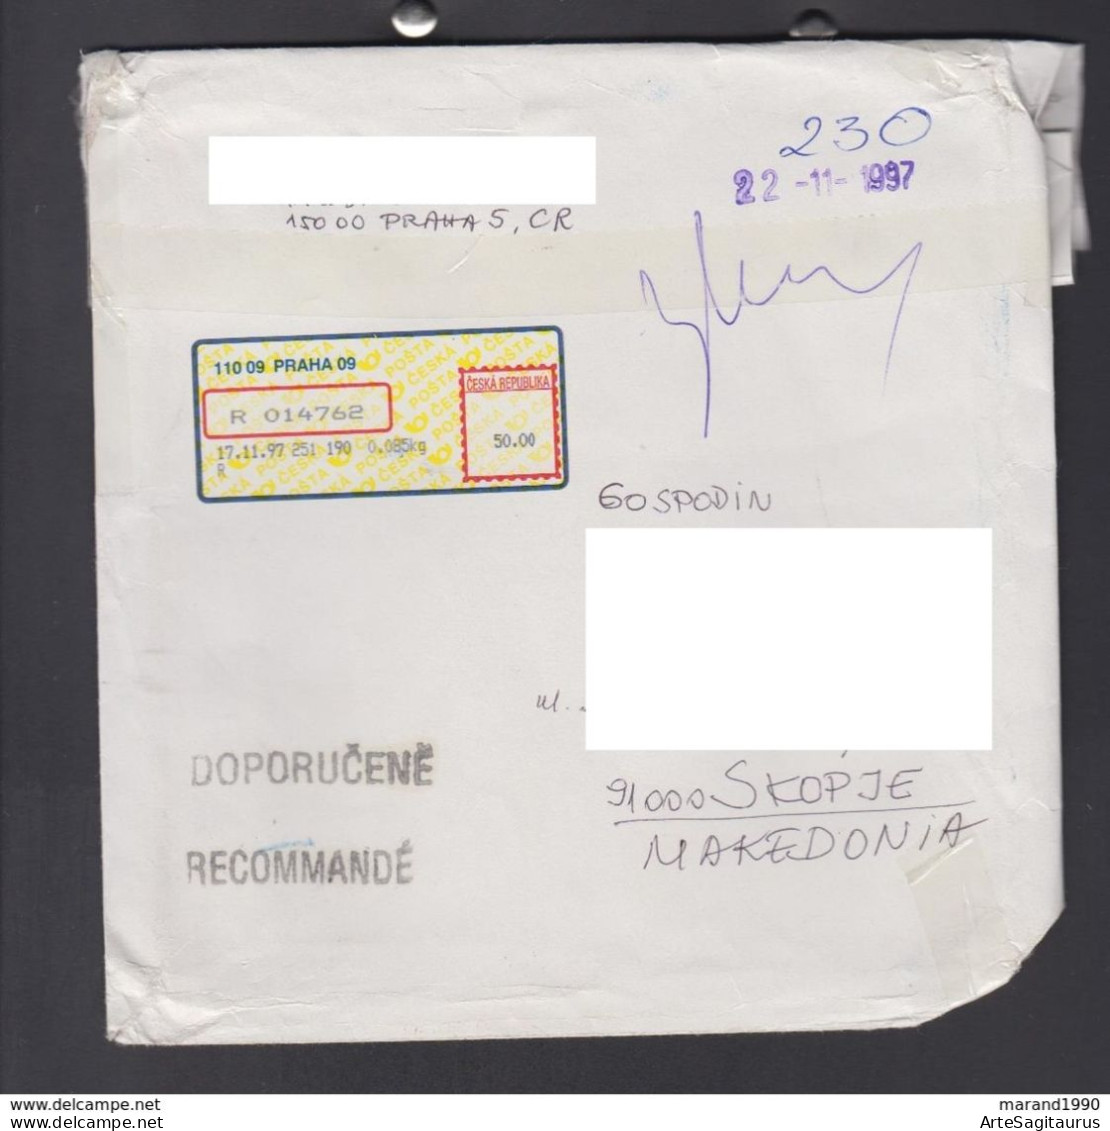 R-COVER LABEL / REPUBLIC OF MACEDONIA SEAL DAMAGED COVER  (006) - Covers & Documents